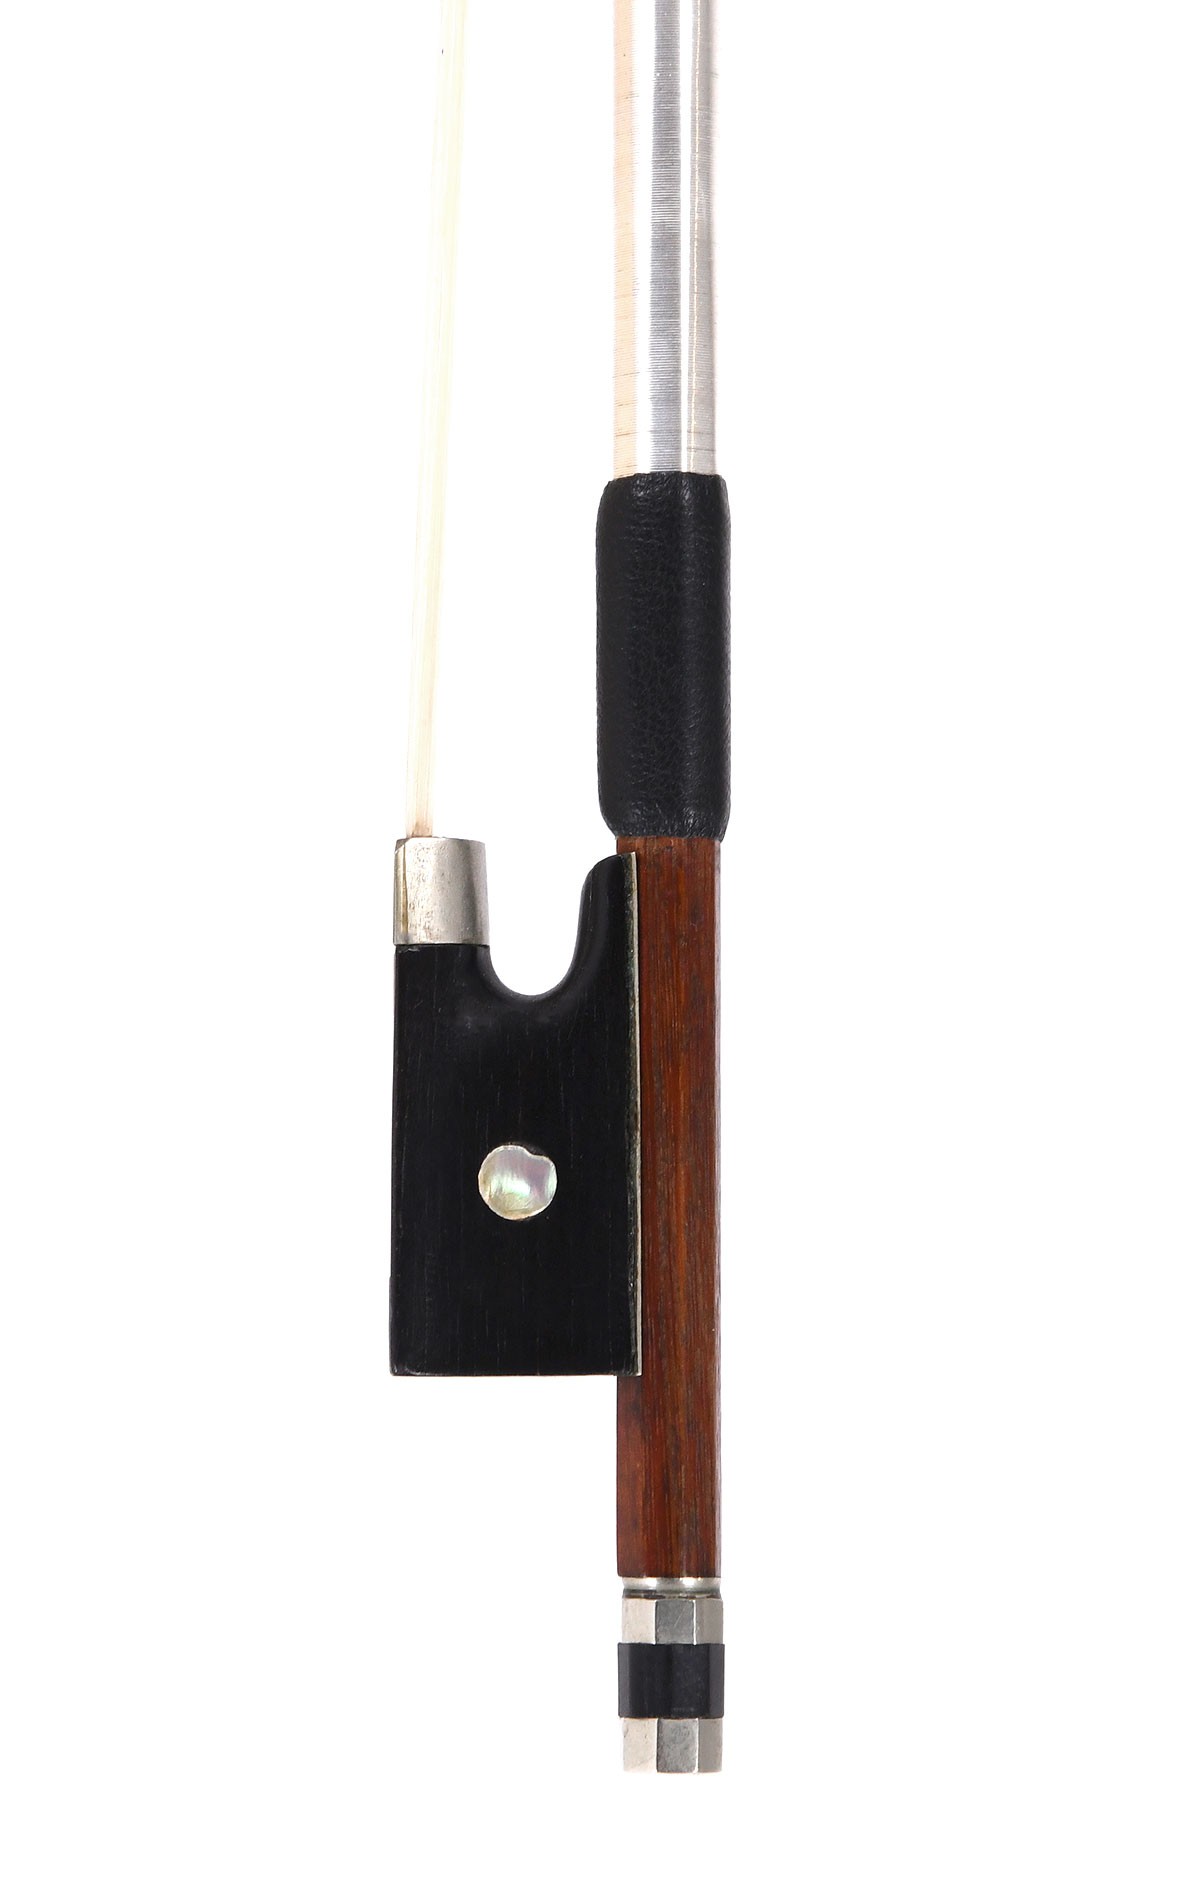 Violin bow from Markneukirchen